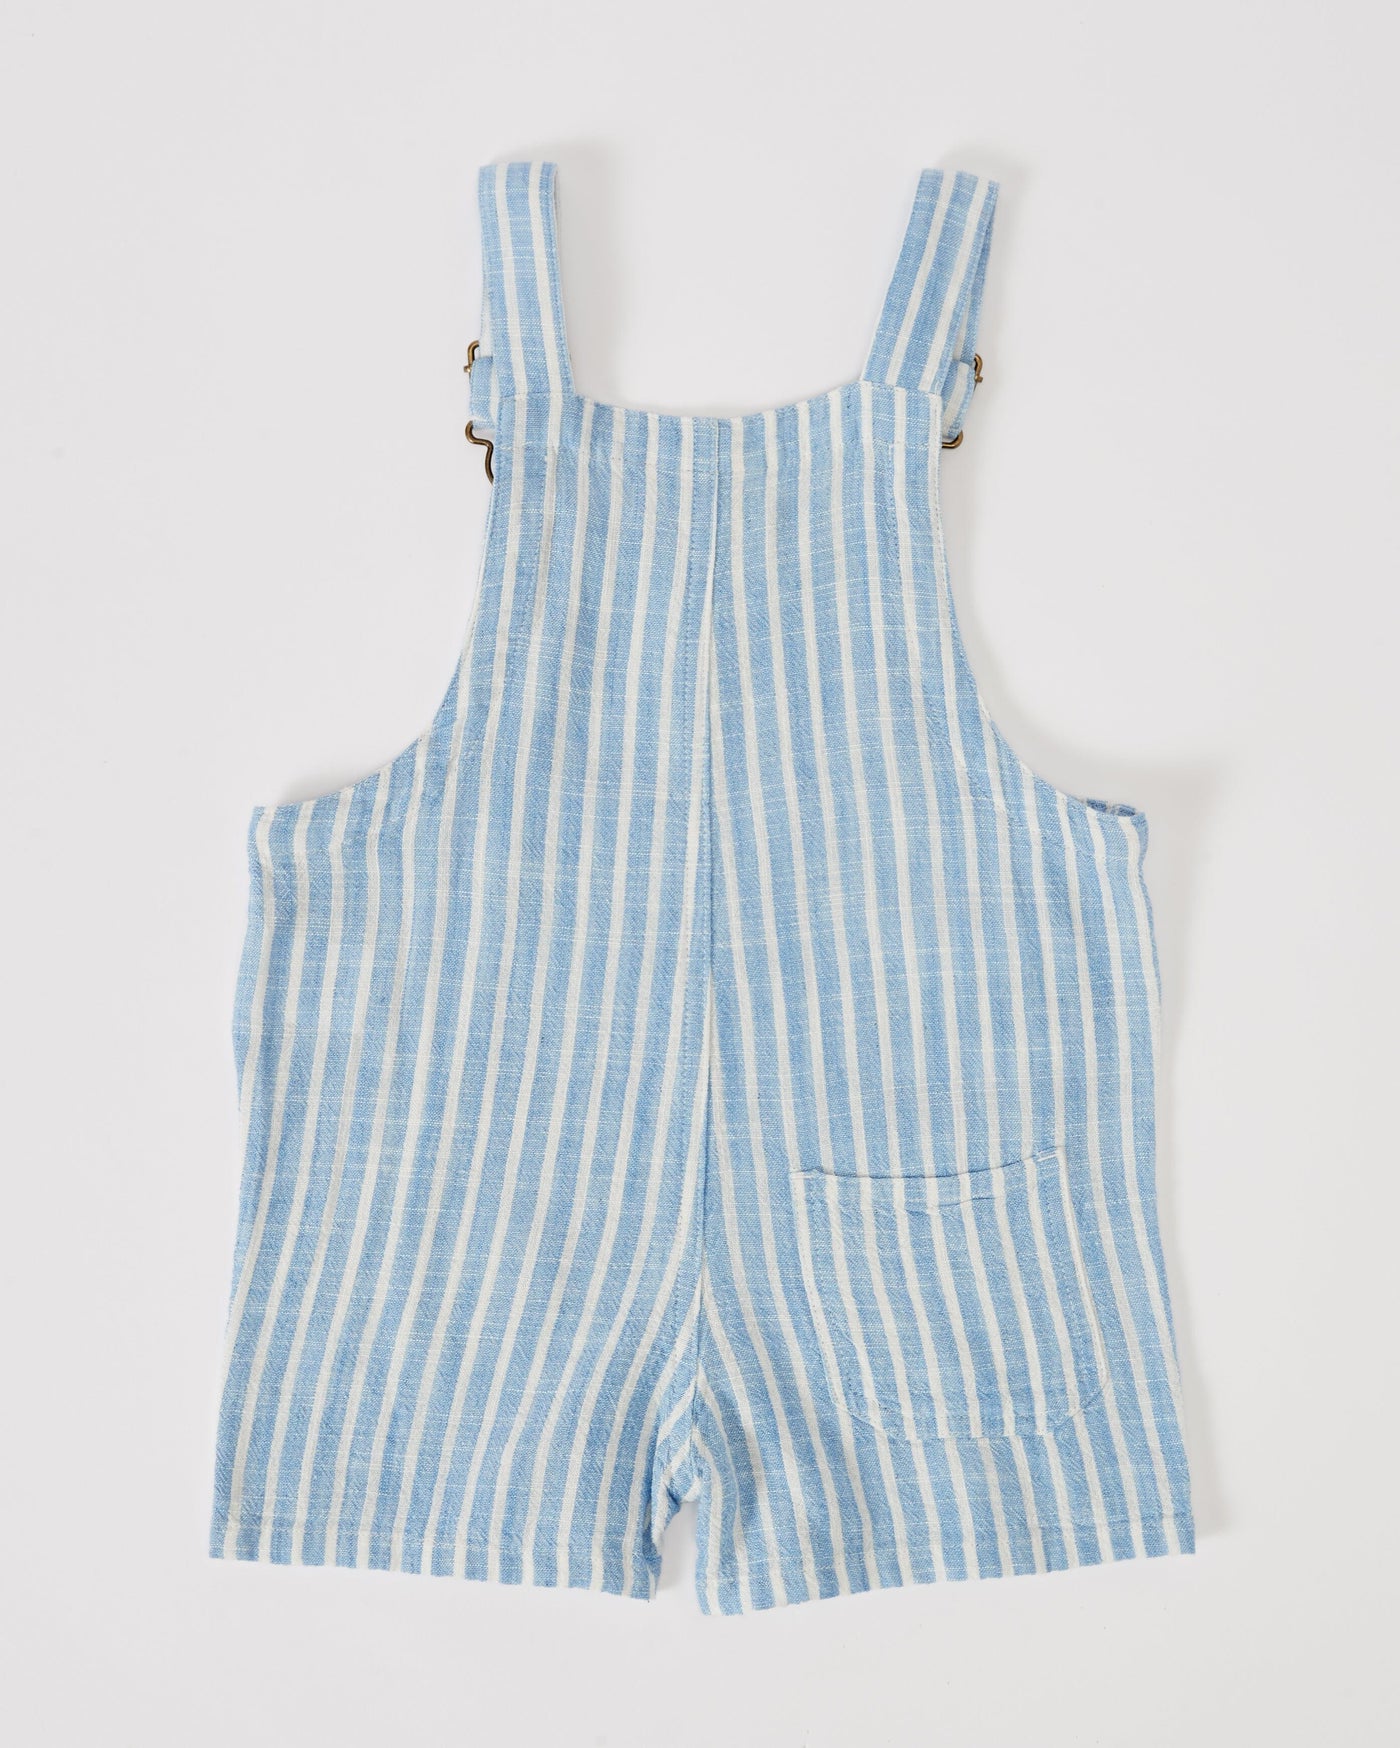 Goldie & Ace Taylor Stripe Overalls - Blue Stripe Overall Goldie & Ace 